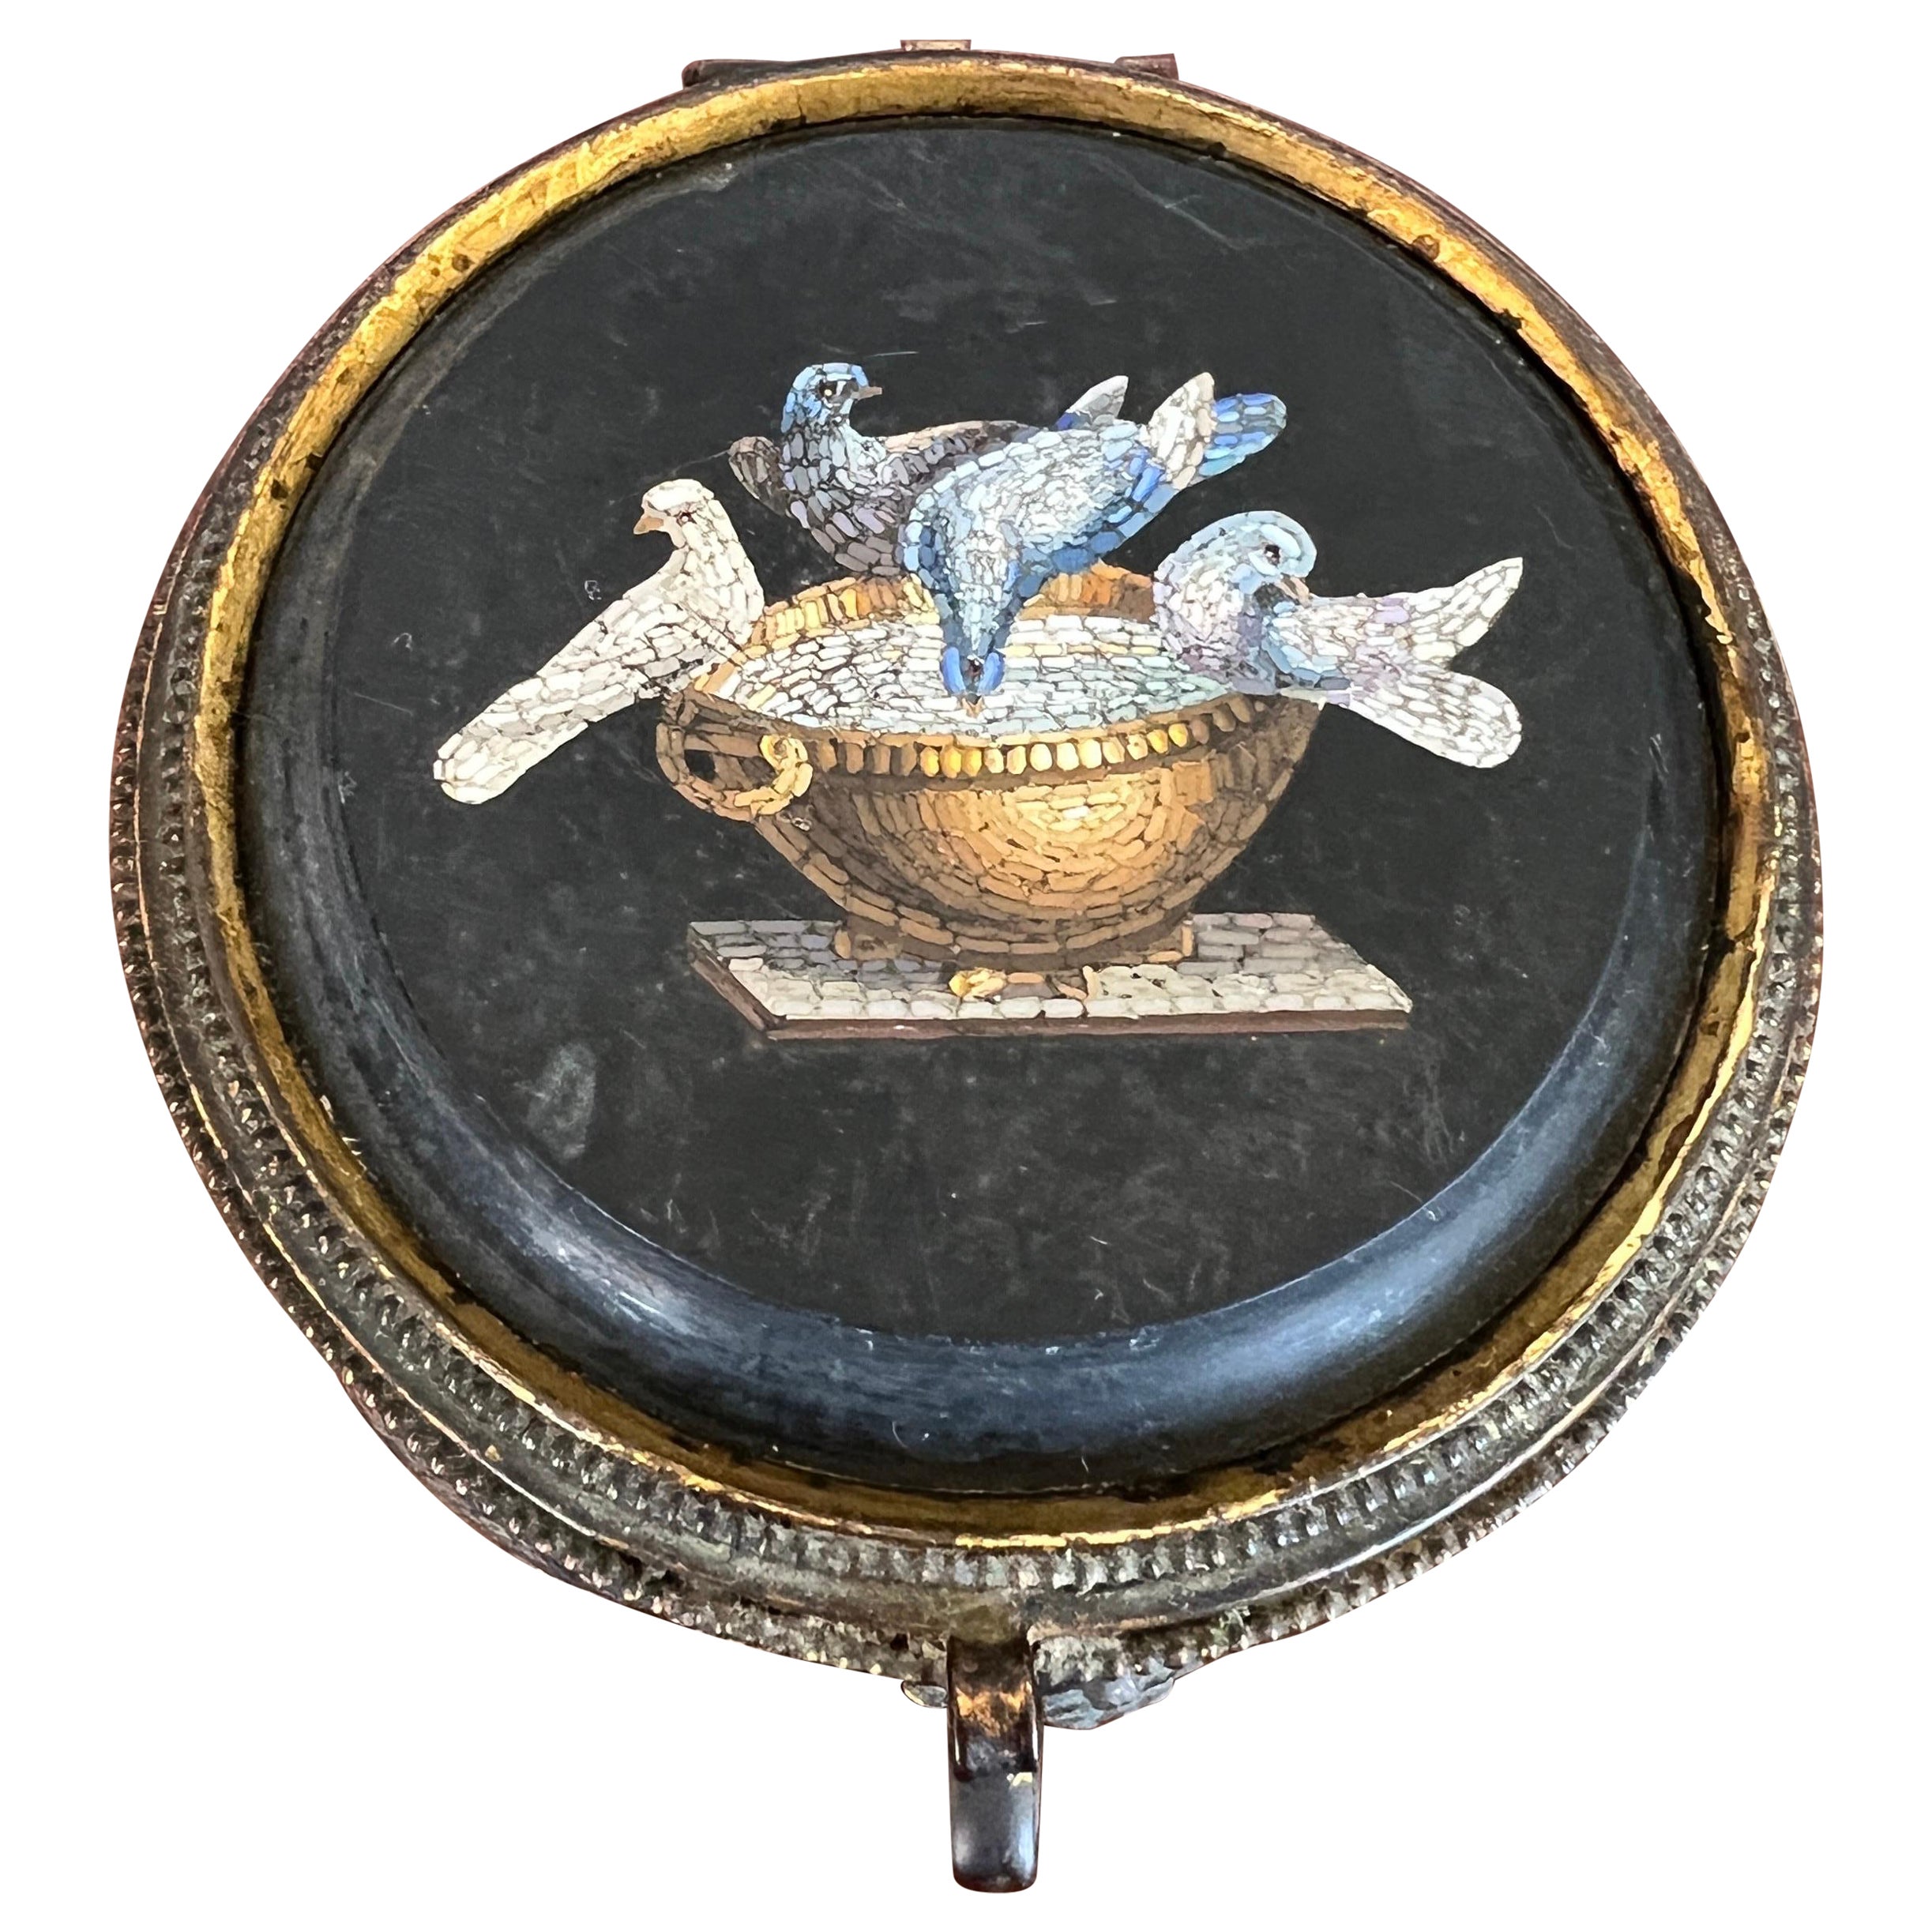 19th C. Italian Grand Tour Micro-Mosaic "Doves of Pliny" Box After Antiquity For Sale